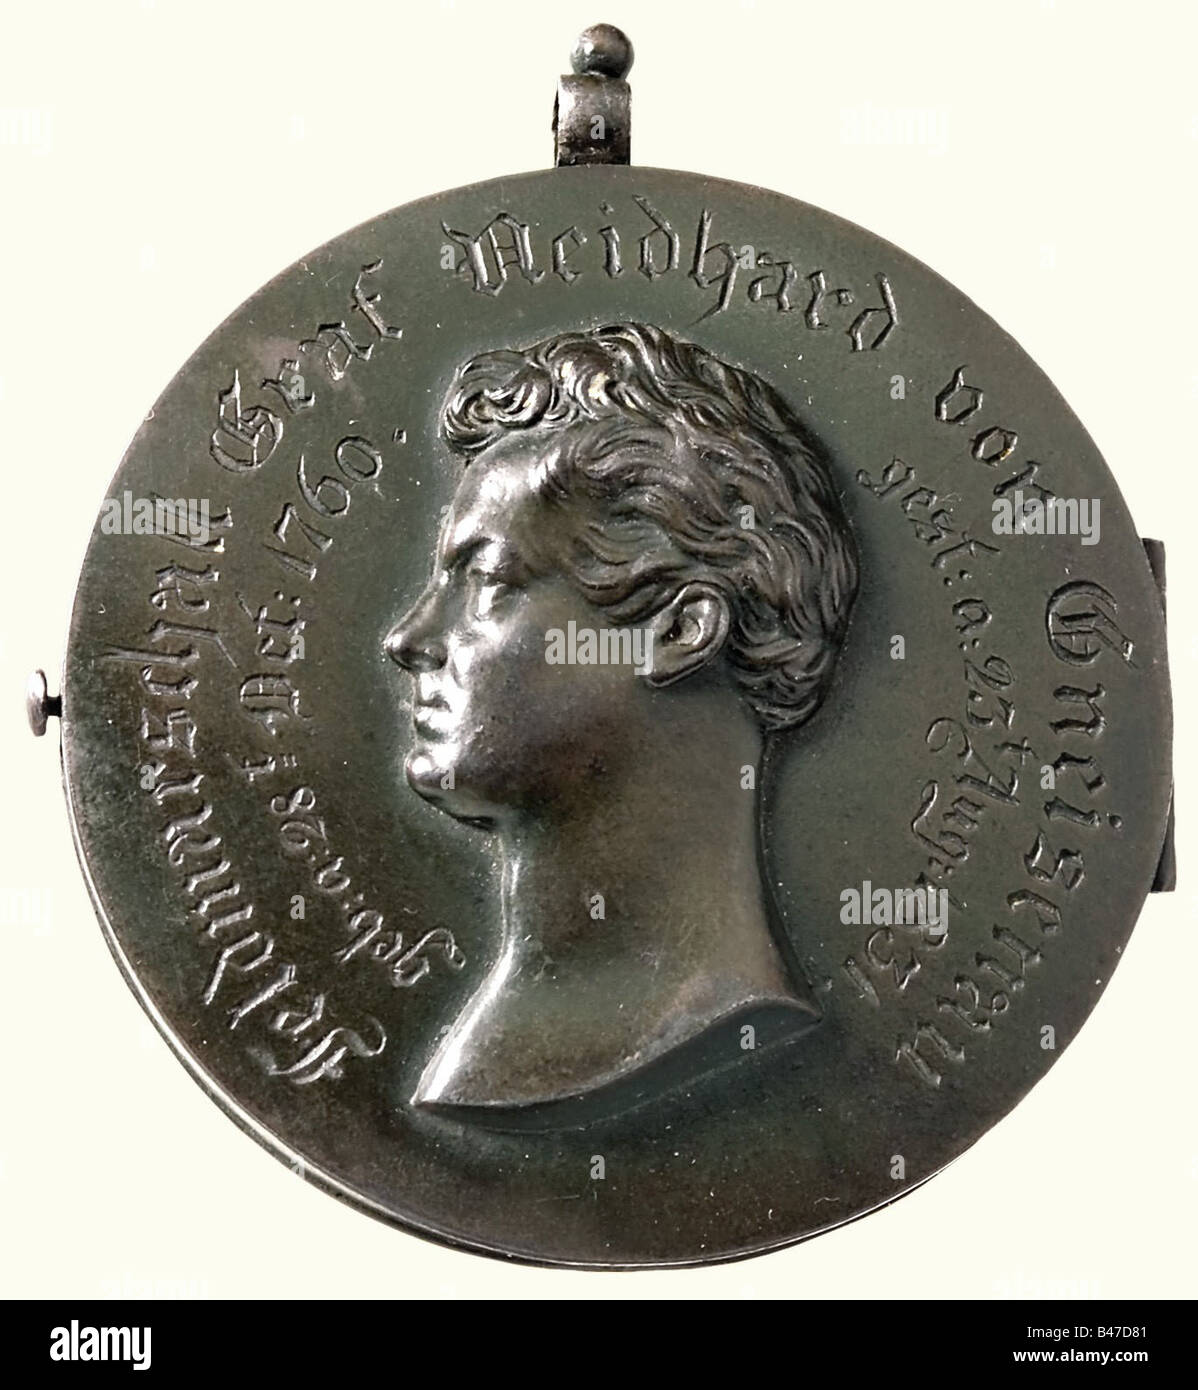 Neidhard von Gneisenau (1760 - 1831), Field Marshal and Army Reformer. Folding iron locket, bearing a relief portrait of Gneisenau's head on the front along with the dates of his birth and death. There is an iron cross in a laurel wreath in relief on the back. Inside is a lock of blond hair, presumably Gneisenau's, sewn on to a piece of light blue silk. The locket has green patina and a suspension ring(?). Diameter 77 mm. Weight 167 grams. people, 19th century, Prussian, Prussia, German, Germany, militaria, military, object, objects, stills, clipping, clippings, Stock Photo